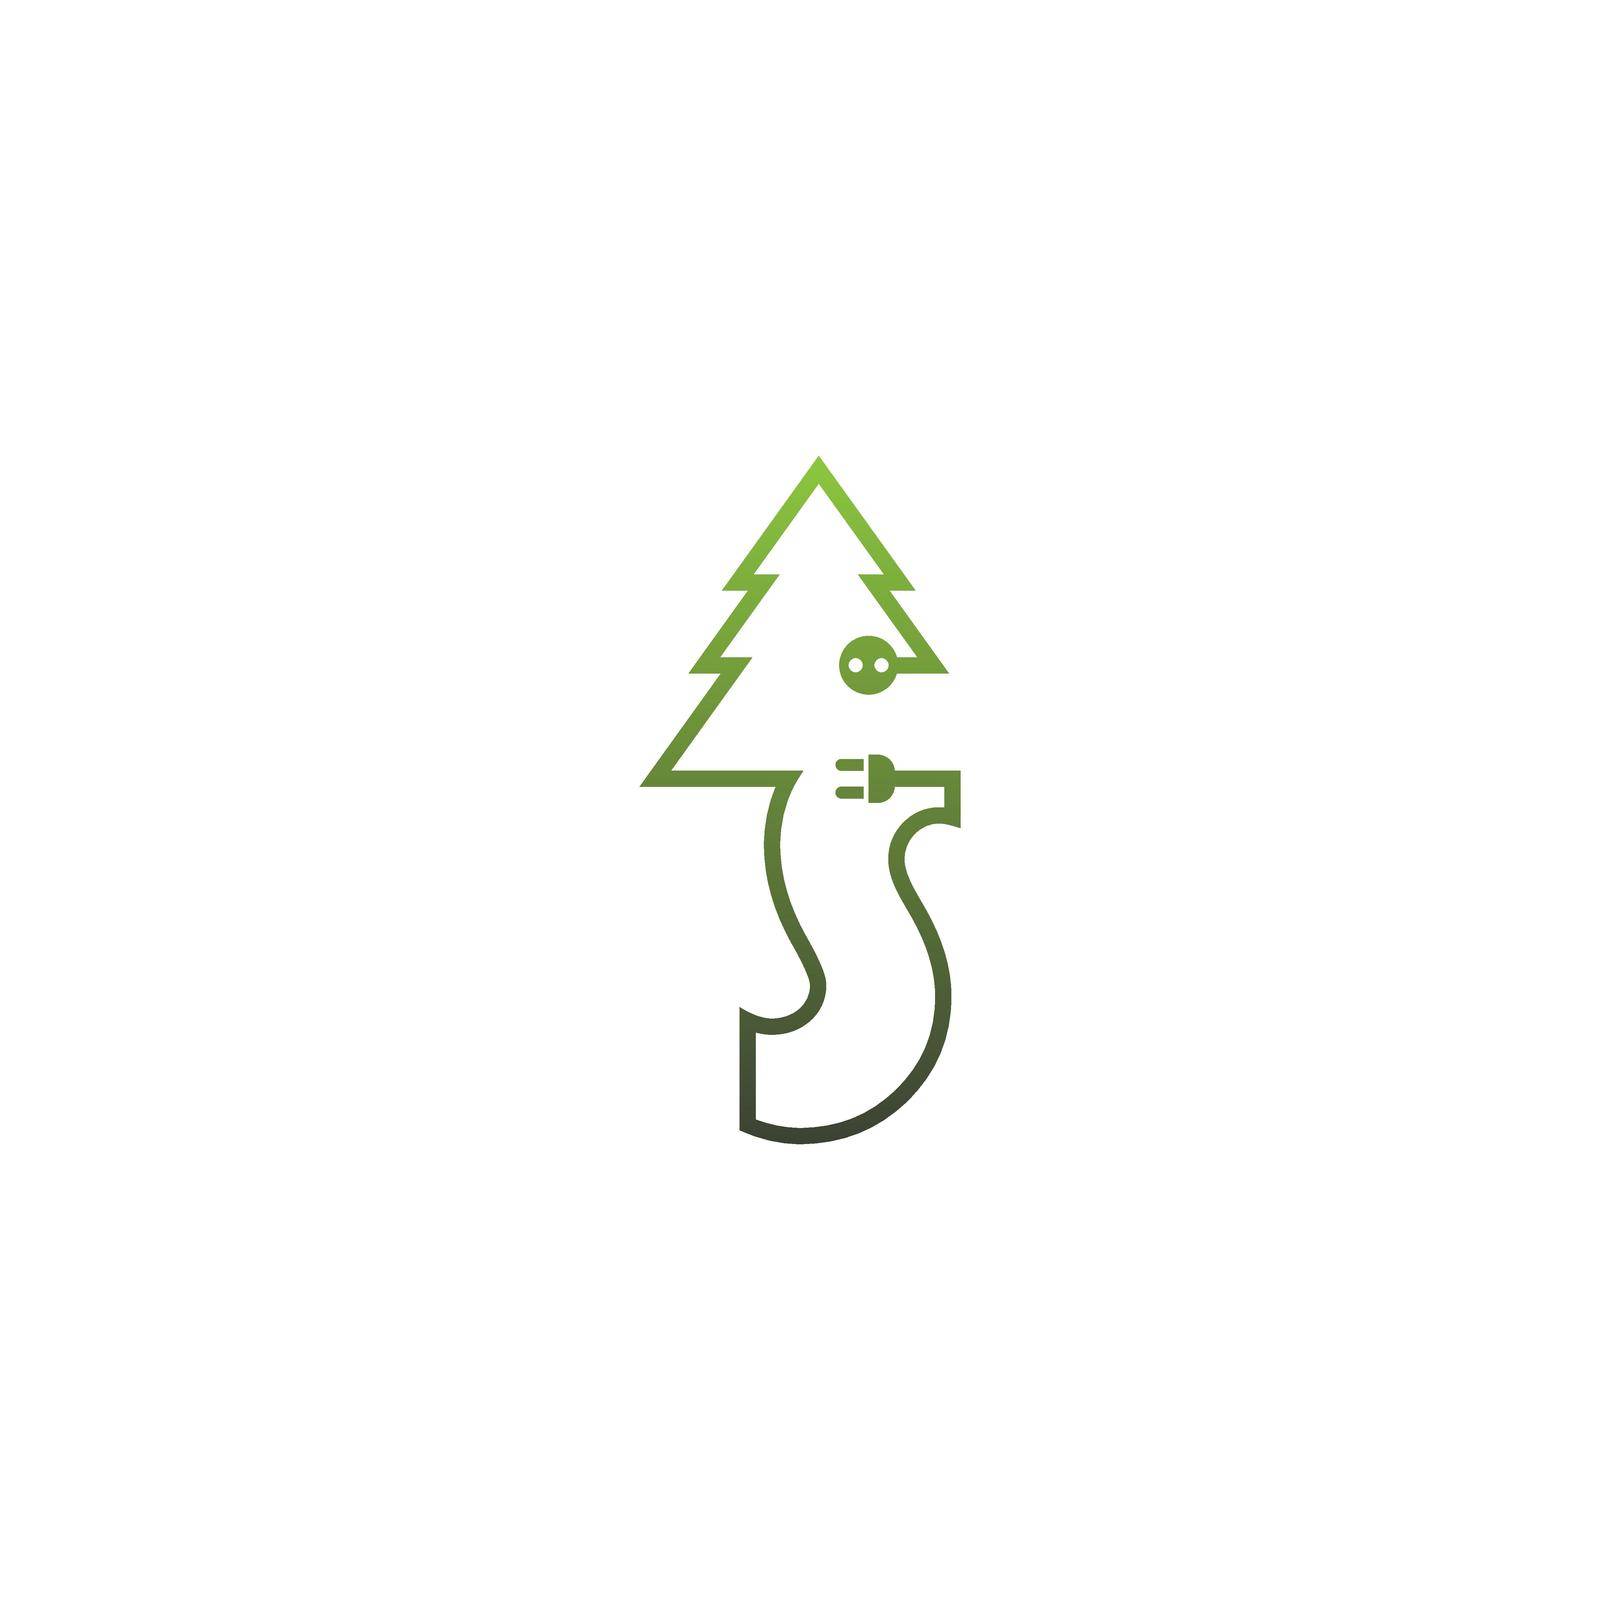 Letter tree Logo, Concept Letter + icon tree vector by bellaxbudhong3